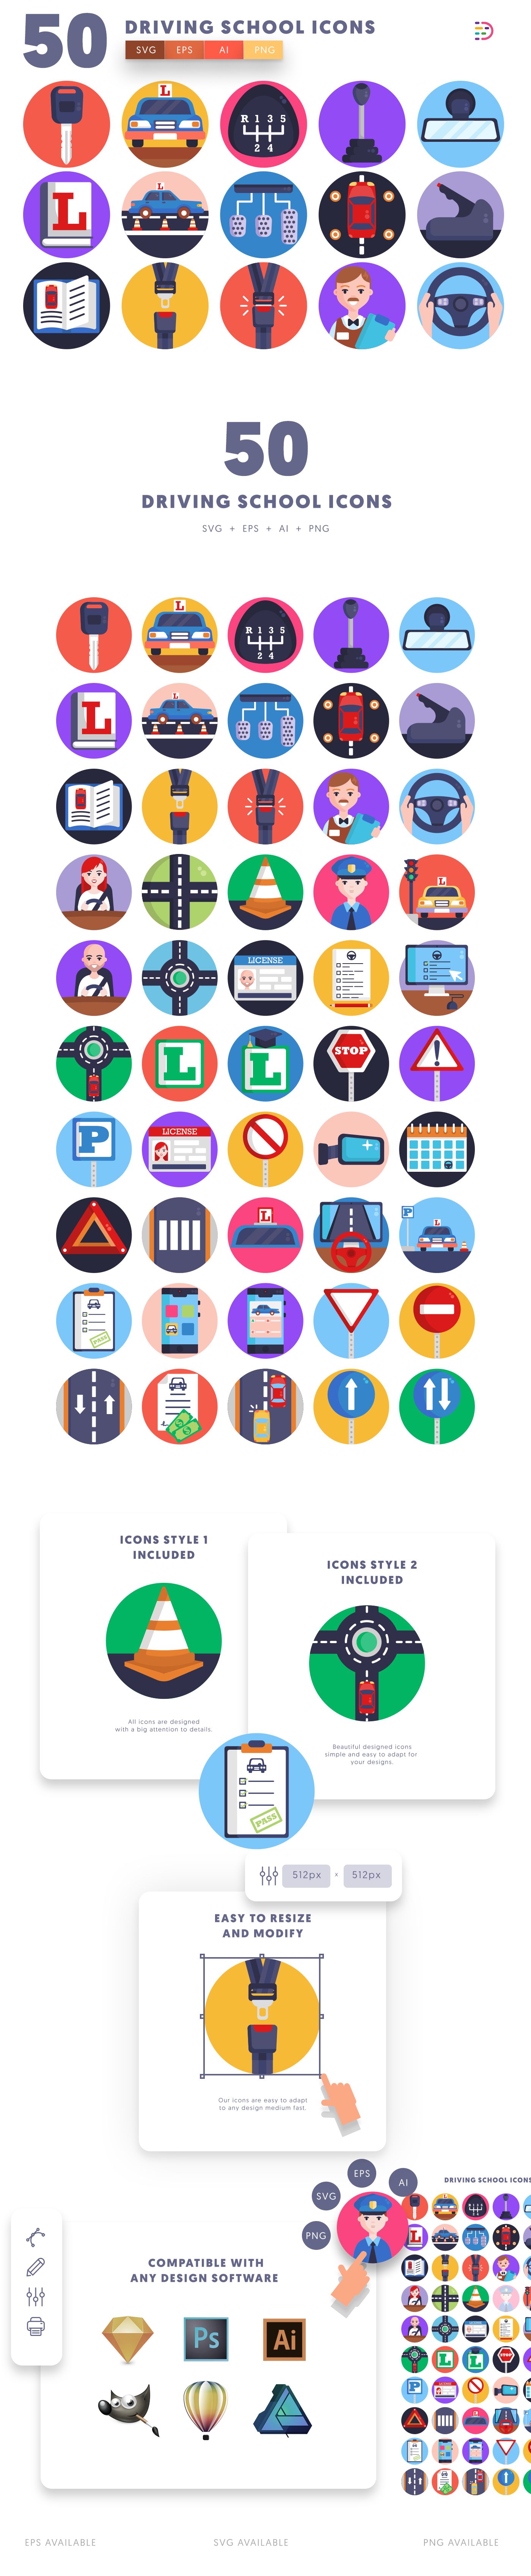 Editable driving school icons icon pack, easy to edit and customize icons